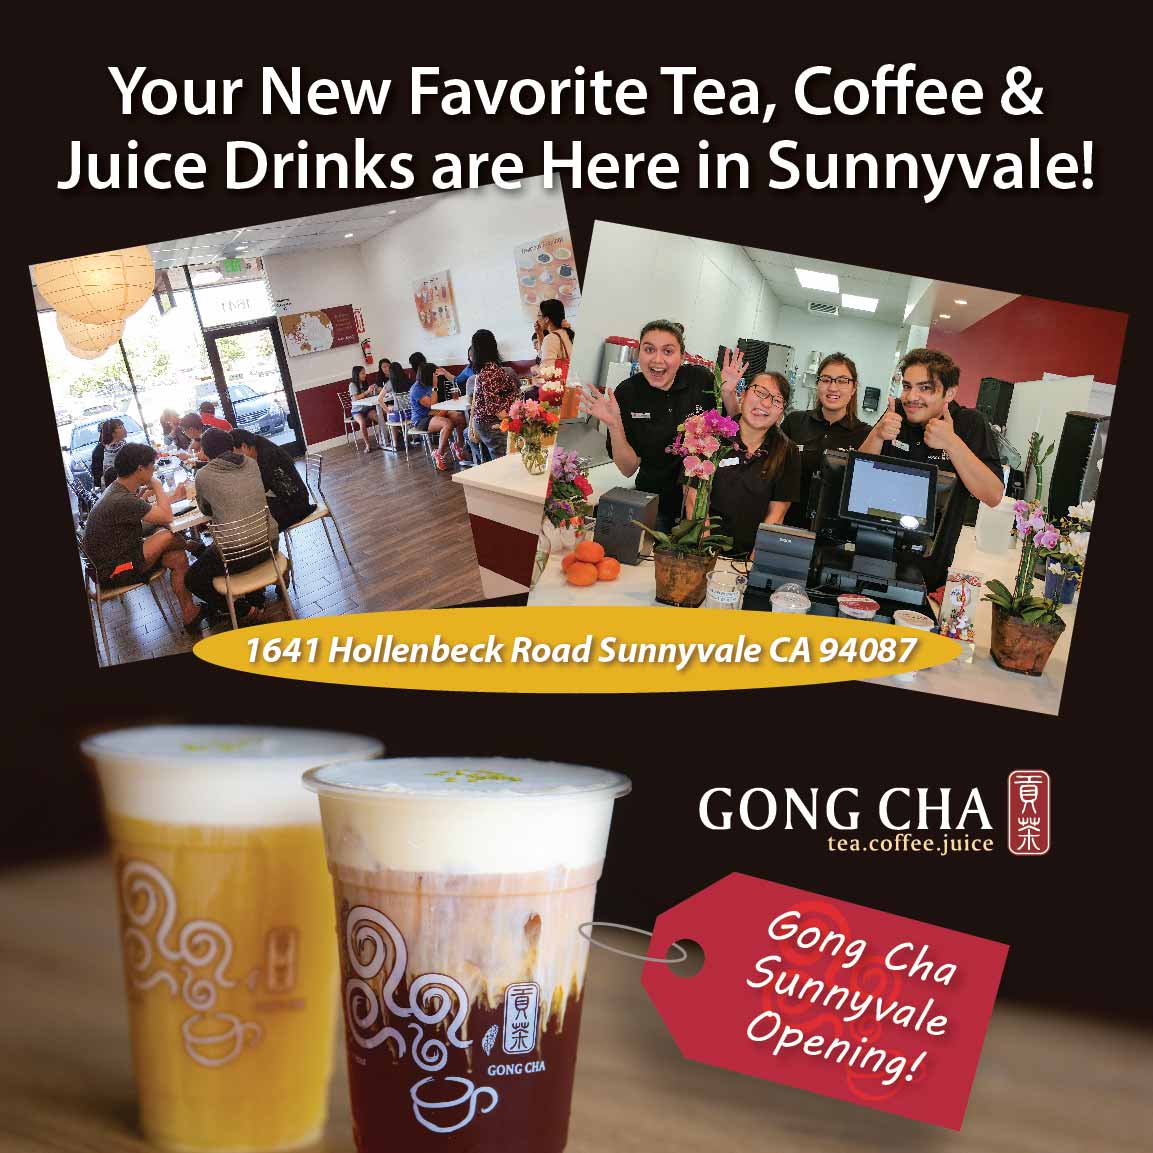 Gong Cha Sunnyvale Opening